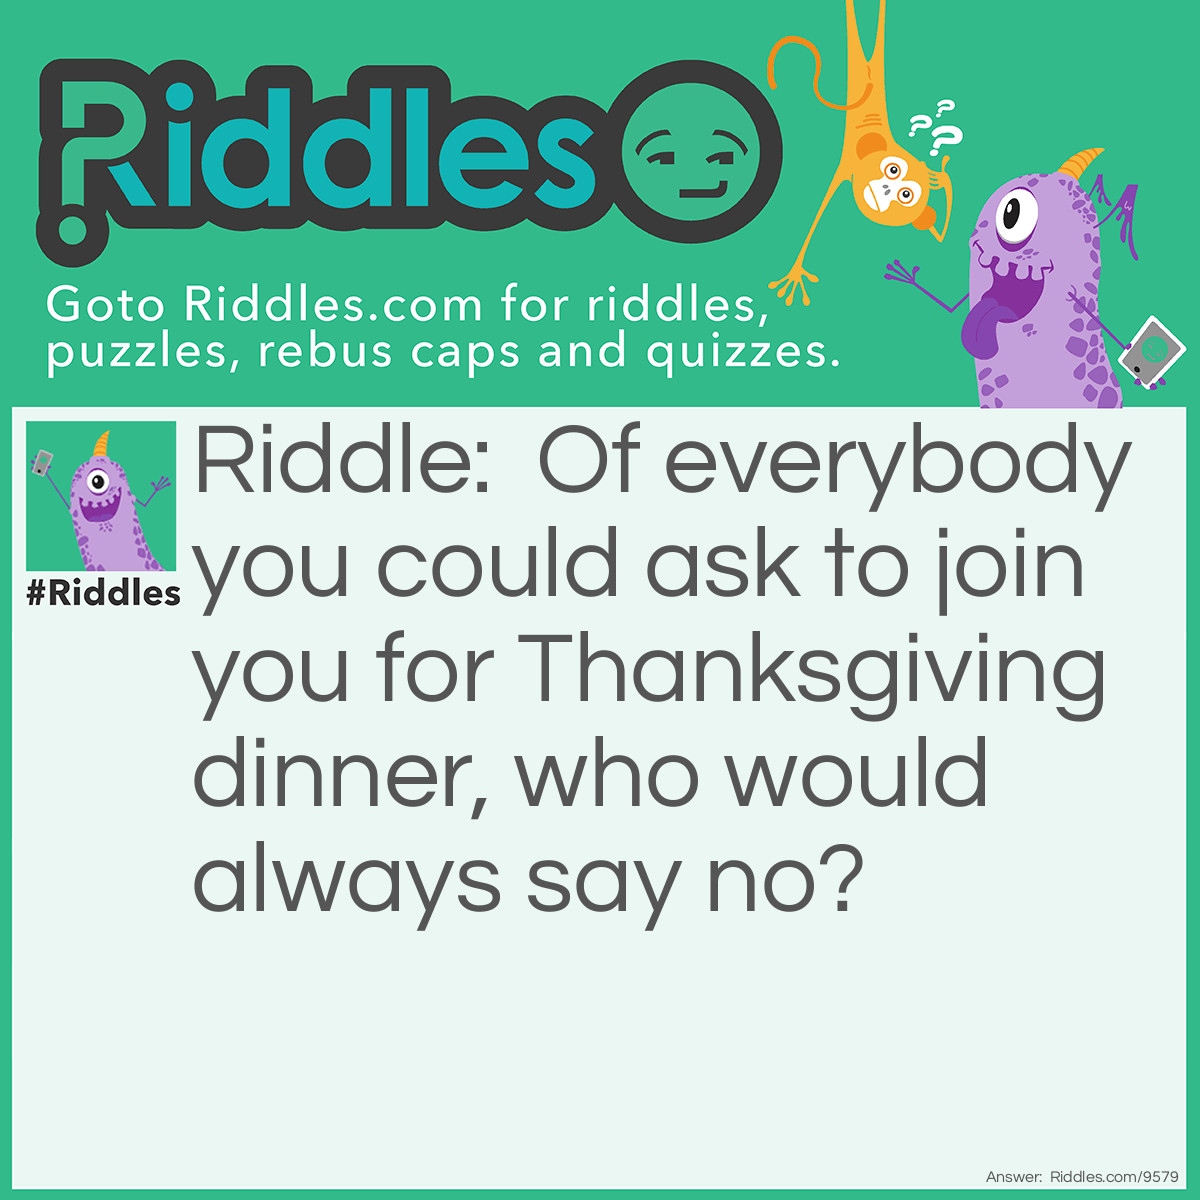 Riddle: Of everybody, you could ask to join you for <a href="https://www.riddles.com/quiz/thanksgiving-riddles">Thanksgiving</a> dinner, who would always say no? Answer: The turkey!